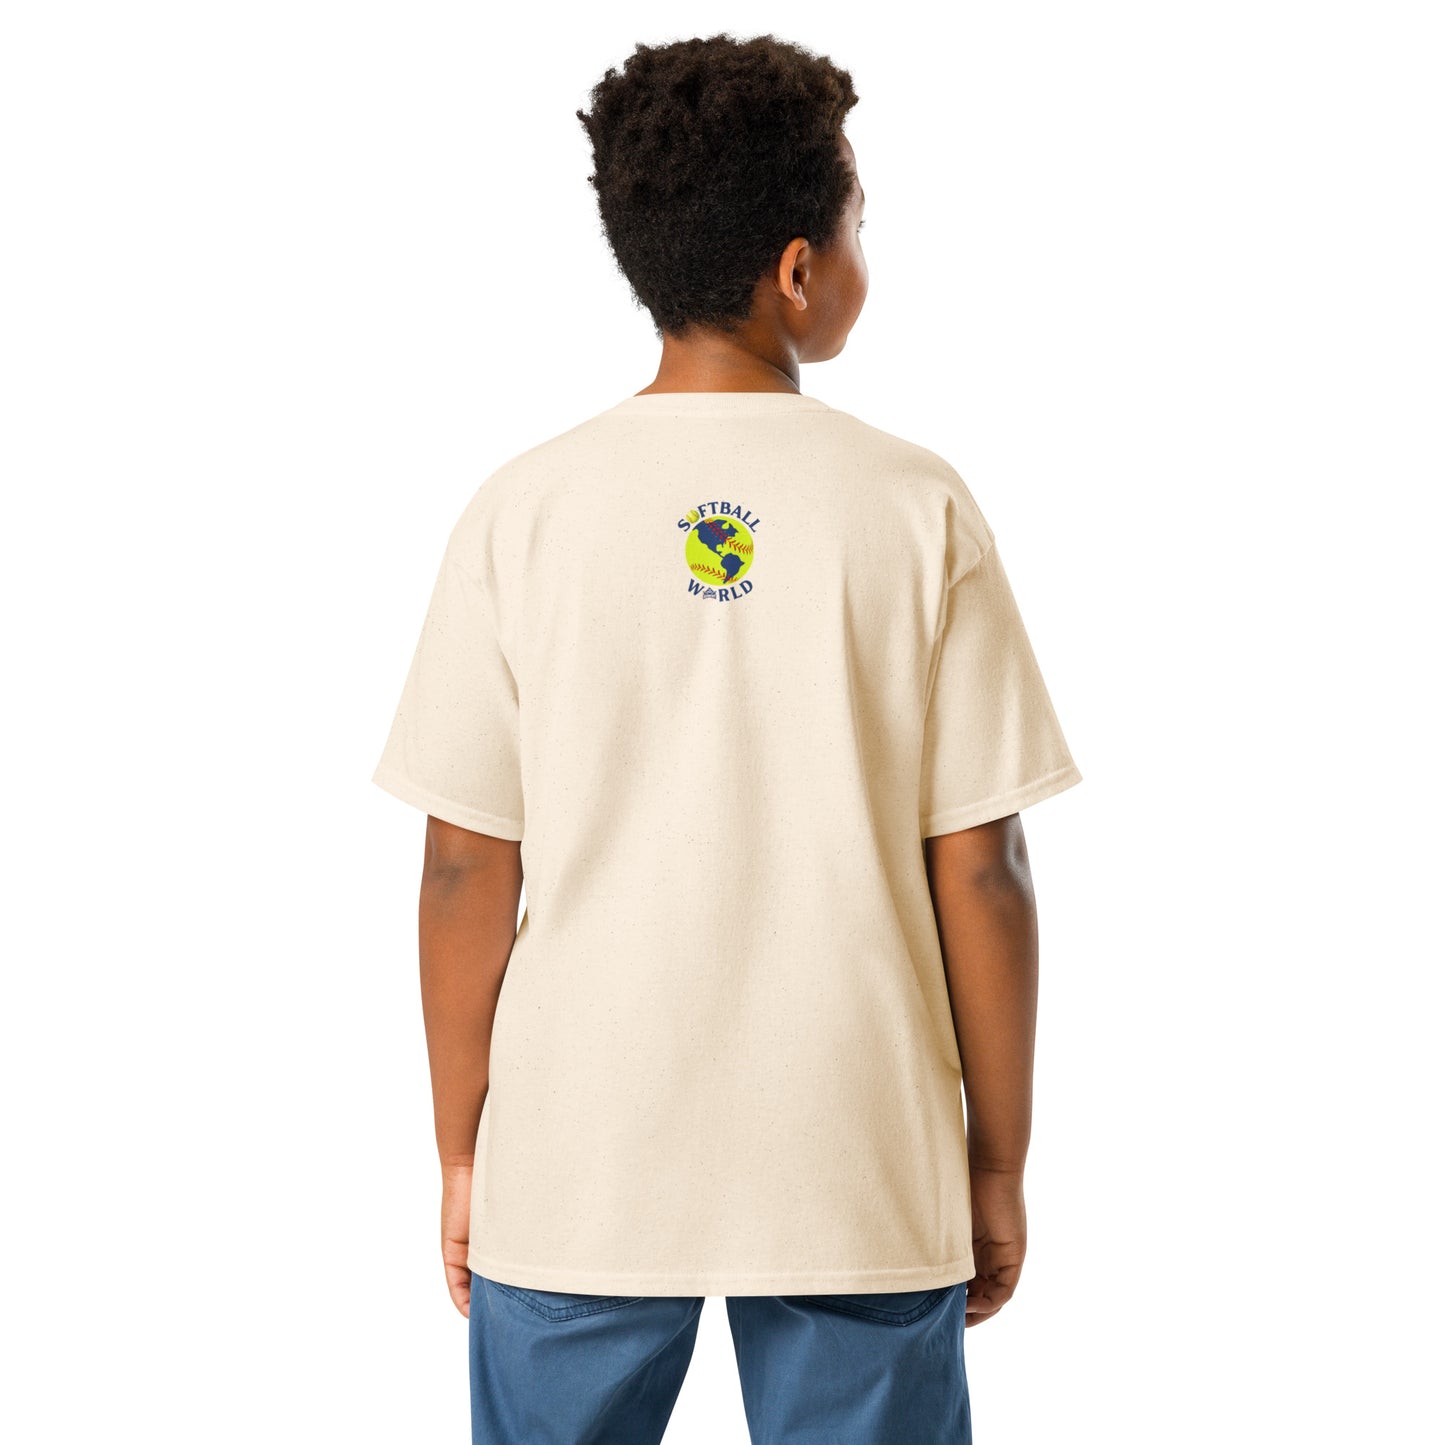 Youth classic tee